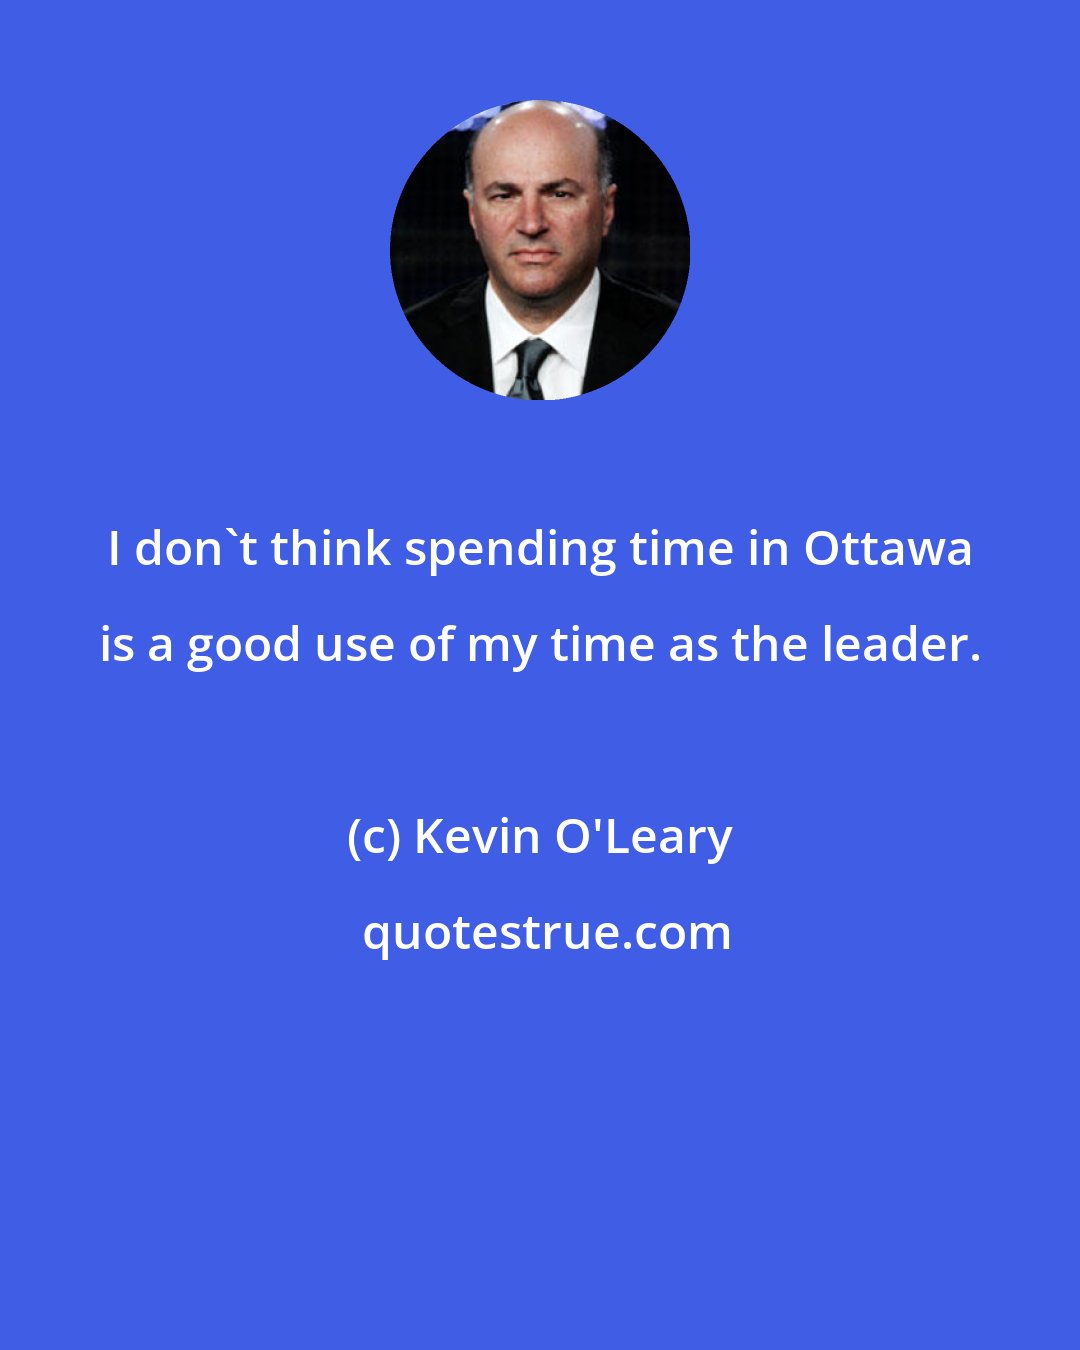 Kevin O'Leary: I don't think spending time in Ottawa is a good use of my time as the leader.